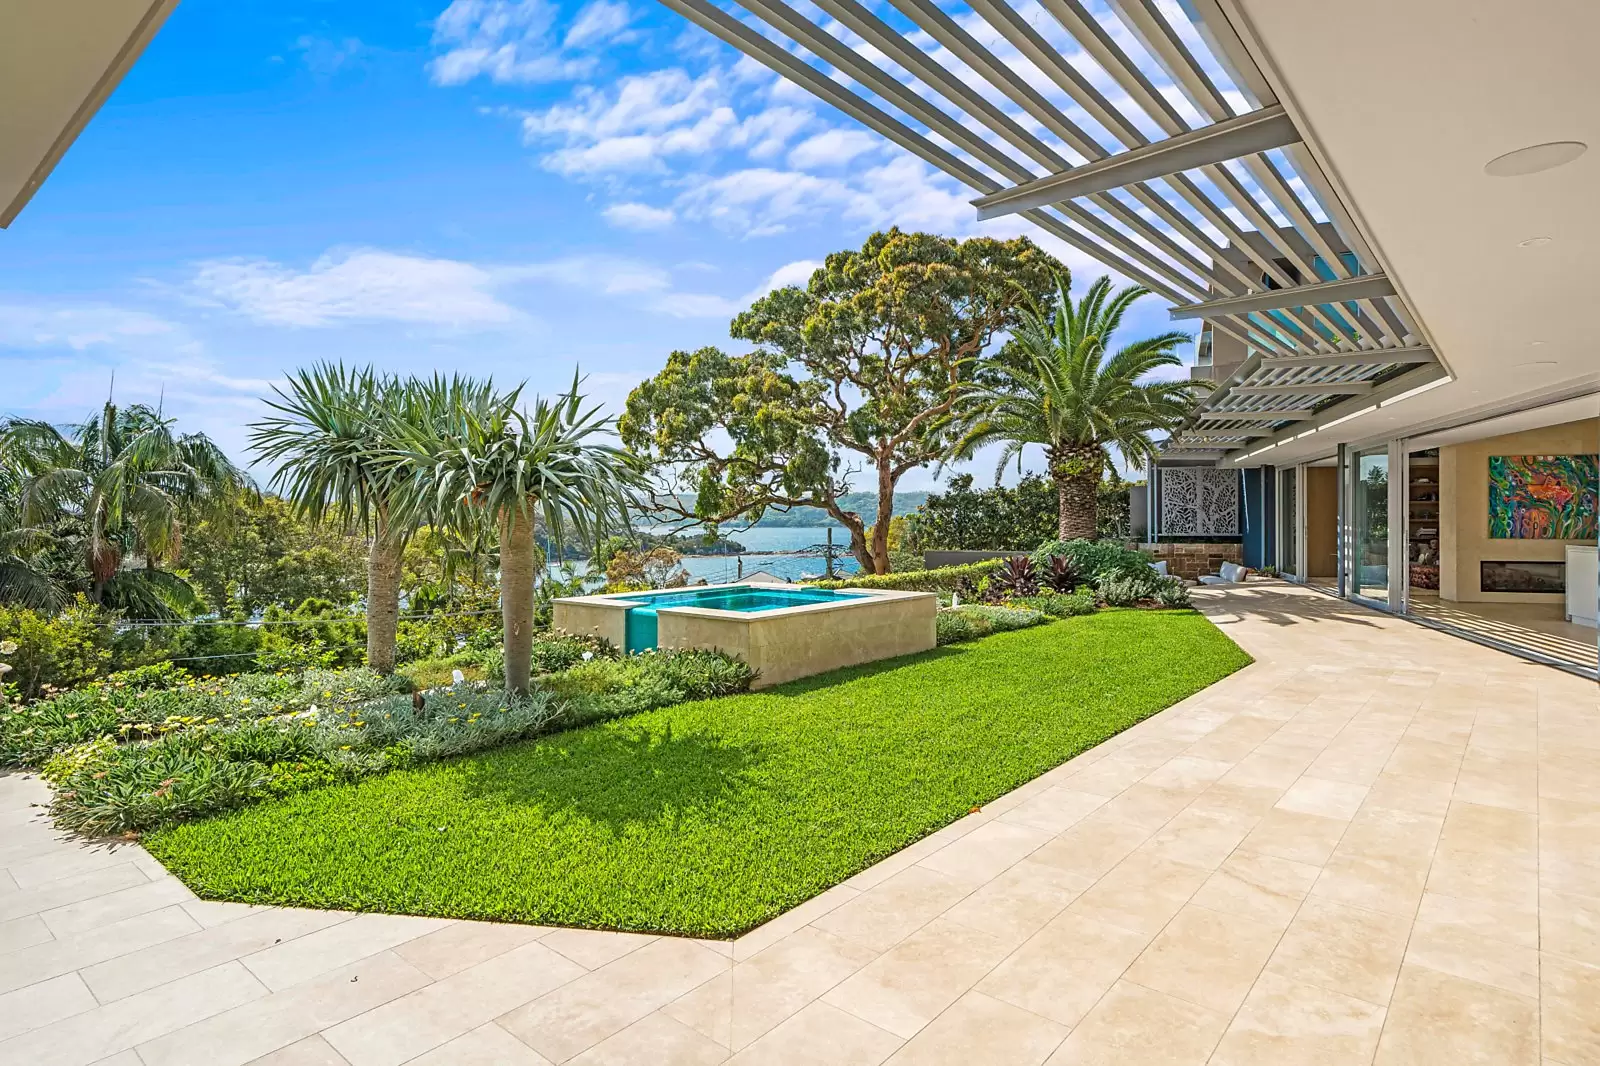 Photo #5: 97 Wentworth Road, Vaucluse - For Sale by Sydney Sotheby's International Realty